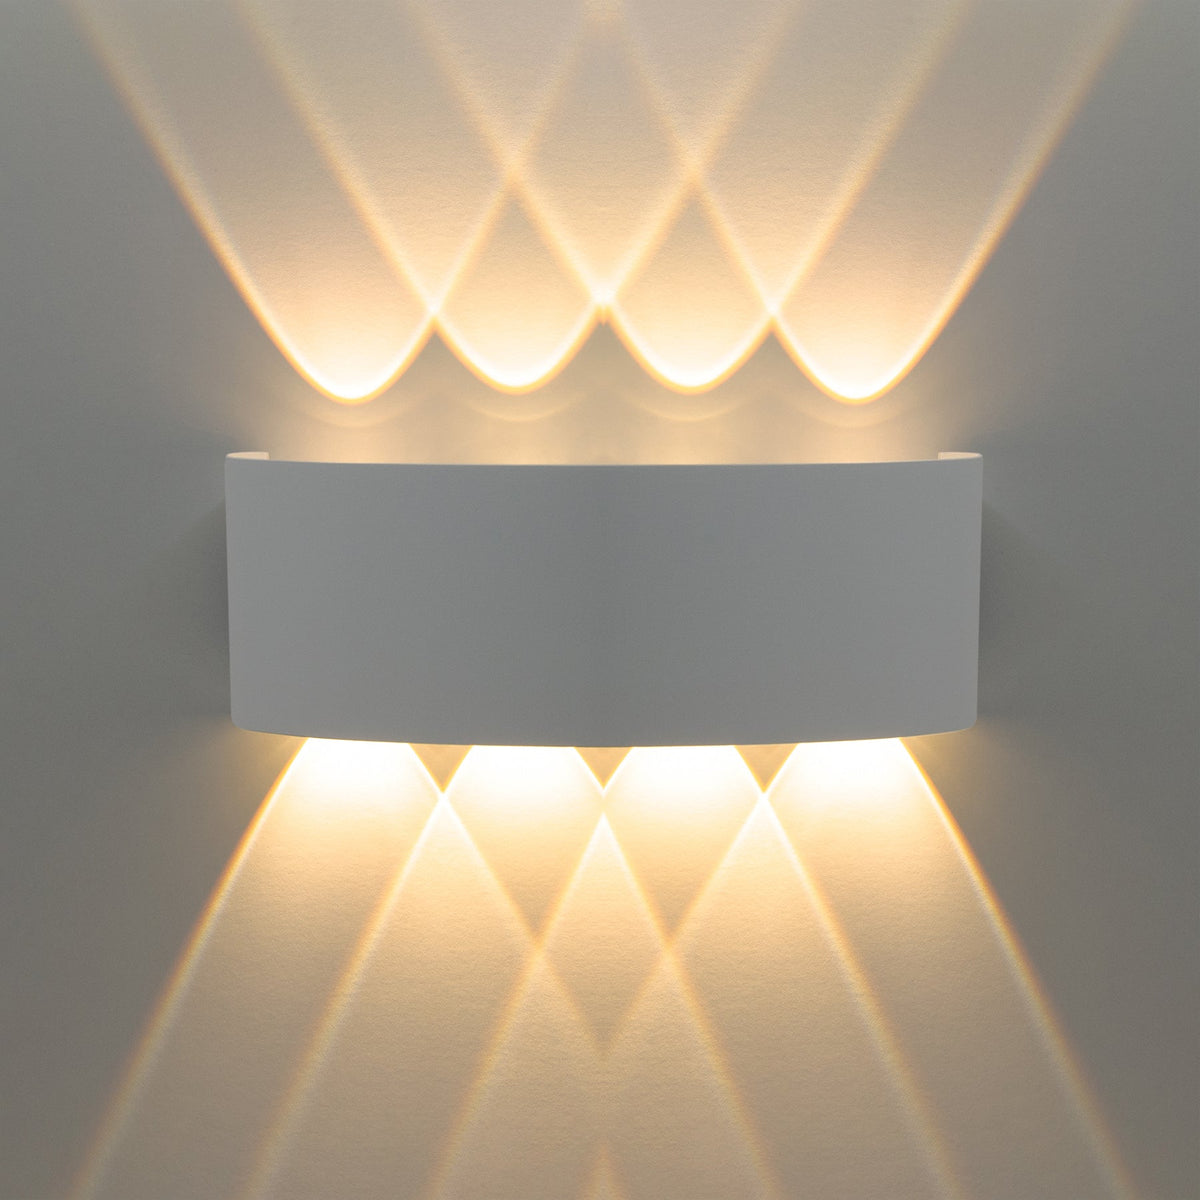 G.W.S. LED LED Wall Lights 8W / Warm White (3000K) 8W White Up and Down LED Wall Light (WL-T8)